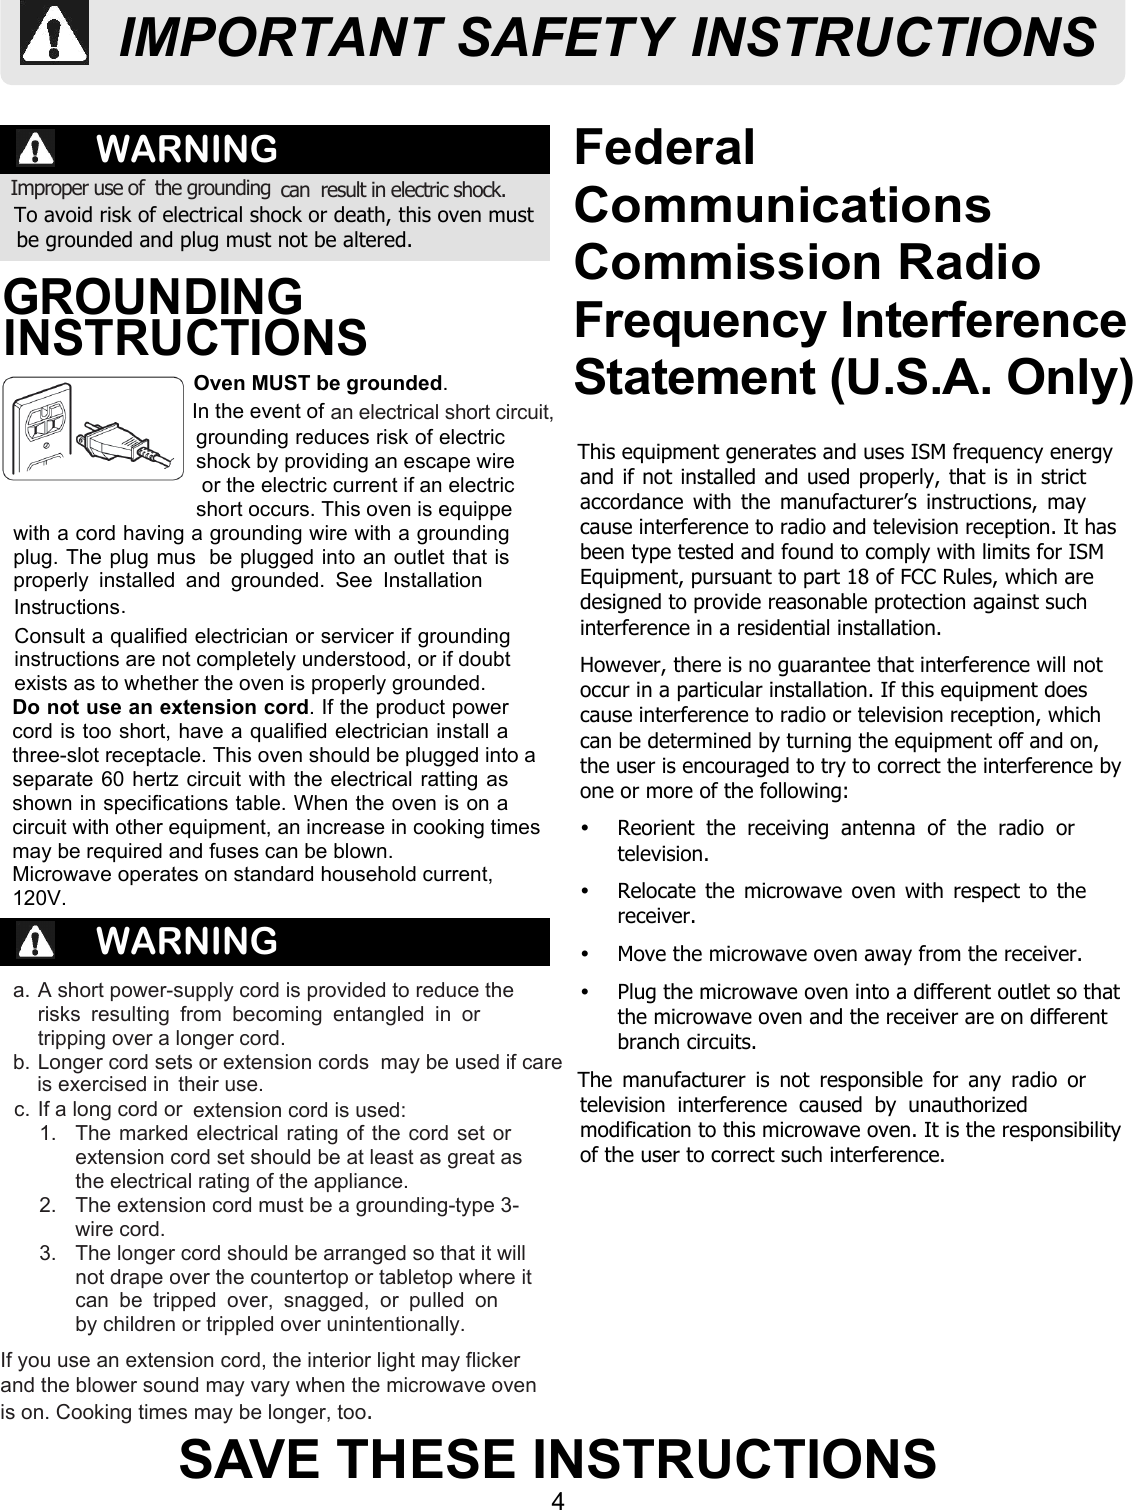 4SAVE THESE INSTRUCTIONSFederalCommunicationsCommission RadioFrequency InterferenceStatement (U.S.A. Only)WARNINGWARNINGTo avoid risk of electrical shock or death, this oven mustbe grounded and plug must not be altered.a. A short power-supply cord is provided to reduce therisks  resulting  from  becoming  entangled  in  ortripping over a longer cord.their use.1.  The marked electrical rating of the cord set orextension cord set should be at least as great asthe electrical rating of the appliance.2.  The extension cord must be a grounding-type 3-wire cord.3.  The longer cord should be arranged so that it willnot drape over the countertop or tabletop where itcan  be  tripped  over,  snagged,  or  pulled  onIf you use an extension cord, the interior light may flickerand the blower sound may vary when the microwave ovenis on. Cooking times may be longer, too.Oven MUST be grounded.Consult a qualified electrician or servicer if groundinginstructions are not completely understood, or if doubtexists as to whether the oven is properly grounded.Do not use an extension cord. If the product powercord is too short, have a qualified electrician install athree-slot receptacle. This oven should be plugged into aseparate 60 hertz circuit with the electrical ratting asshown in specifications table. When the oven is on acircuit with other equipment, an increase in cooking timesmay be required and fuses can be blown.Microwave operates on standard household current, 120V.This equipment generates and uses ISM frequency energyand if not installed and used properly, that is in strictaccordance with the manufacturer’s instructions, maycause interference to radio and television reception. It hasbeen type tested and found to comply with limits for ISMEquipment, pursuant to part 18 of FCC Rules, which aredesigned to provide reasonable protection against suchinterference in a residential installation.However, there is no guarantee that interference will notoccur in a particular installation. If this equipment doescause interference to radio or television reception, whichcan be determined by turning the equipment off and on,the user is encouraged to try to correct the interference byone or more of the following:Ÿ  Reorient  the  receiving  antenna  of  the  radio  ortelevision.Ÿ  Relocate the  microwave oven with respect to thereceiver.Ÿ  Move the microwave oven away from the receiver.Ÿ  Plug the microwave oven into a different outlet so thatthe microwave oven and the receiver are on differentbranch circuits.The  manufacturer  is  not  responsible  for  any  radio  ortelevision  interference  caused  by  unauthorizedmodification to this microwave oven. It is the responsibilityof the user to correct such interference.Improper use of  the grounding can  result in electric shock. GROUNDING INSTRUCTIONSIn the event of  extension cord is used:an electrical short circuit, shock by providing an escape wireor the electric current if an electricshort occurs. This oven is equippewith a cord having a grounding wire with a groundingplug. The plug mus  be plugged into an outlet that isproperly  installed  and  grounded.  See  InstallationInstructions.grounding reduces risk of electricIMPORTANT SAFETY INSTRUCTIONSb. Longer cord sets or extension cords  may be used if care is exercised inc. If a long cord or by children or trippled over unintentionally.